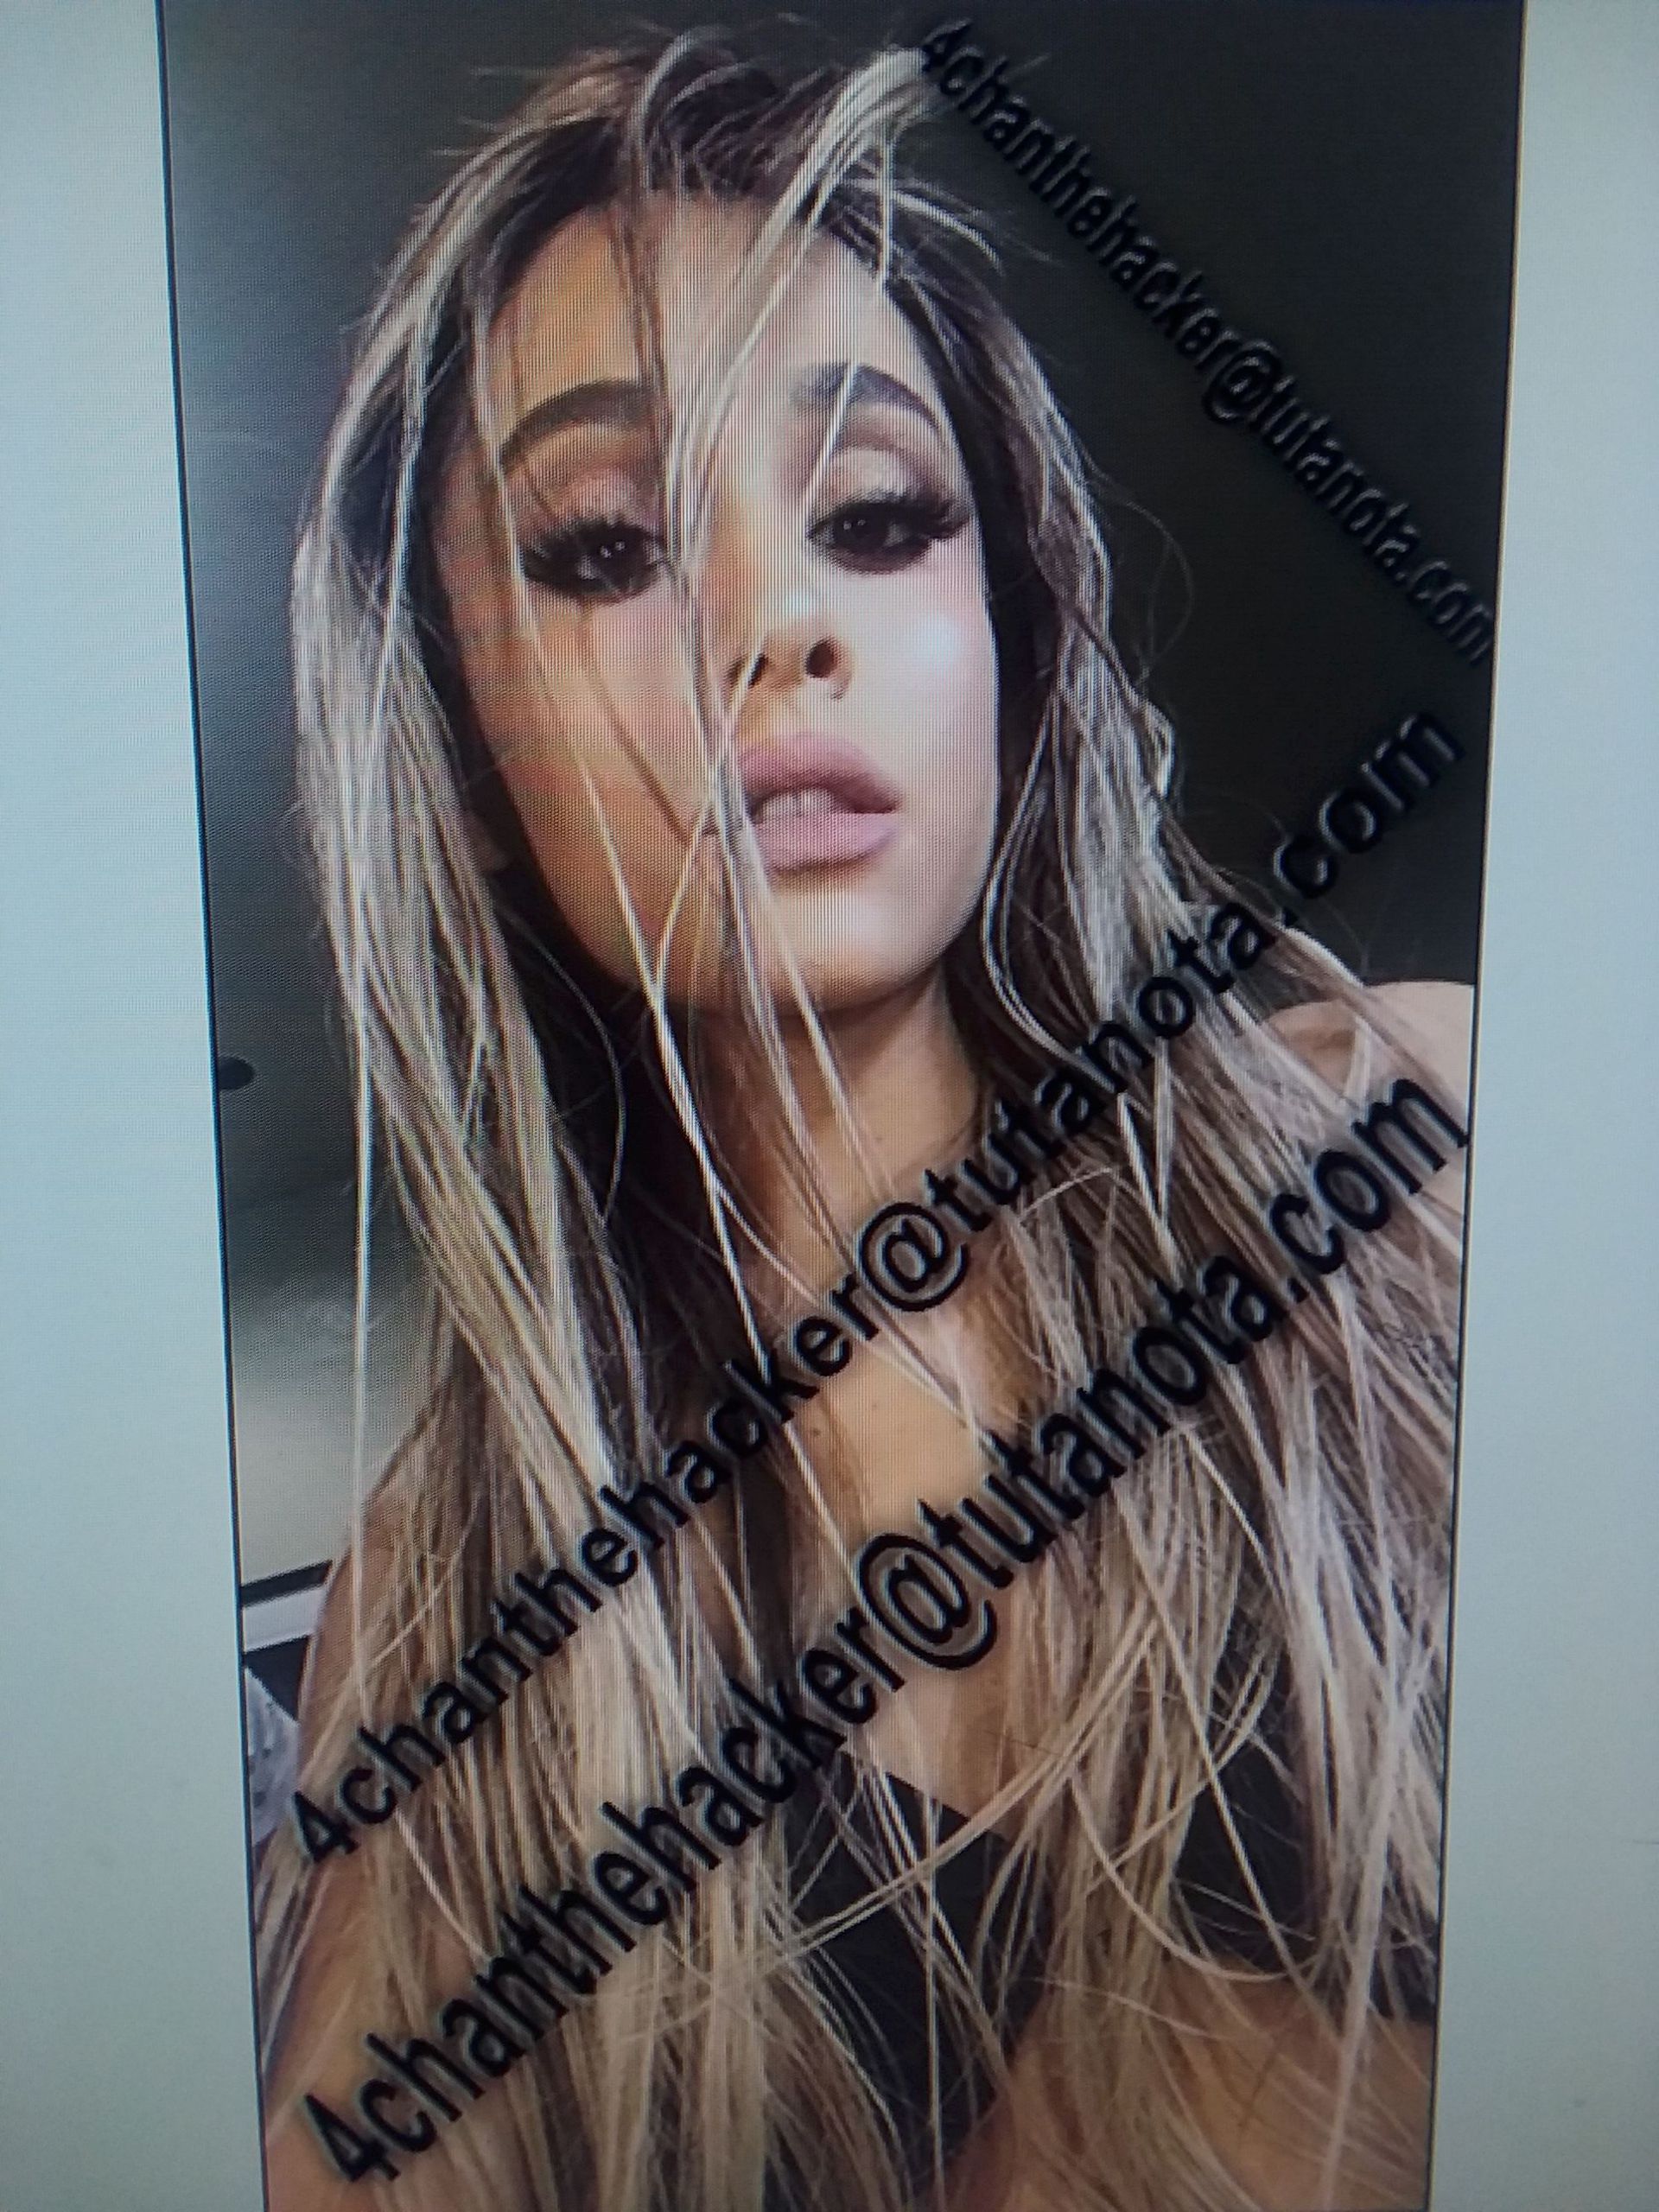 adex tunde recommends ariana grande leaked nude pics pic